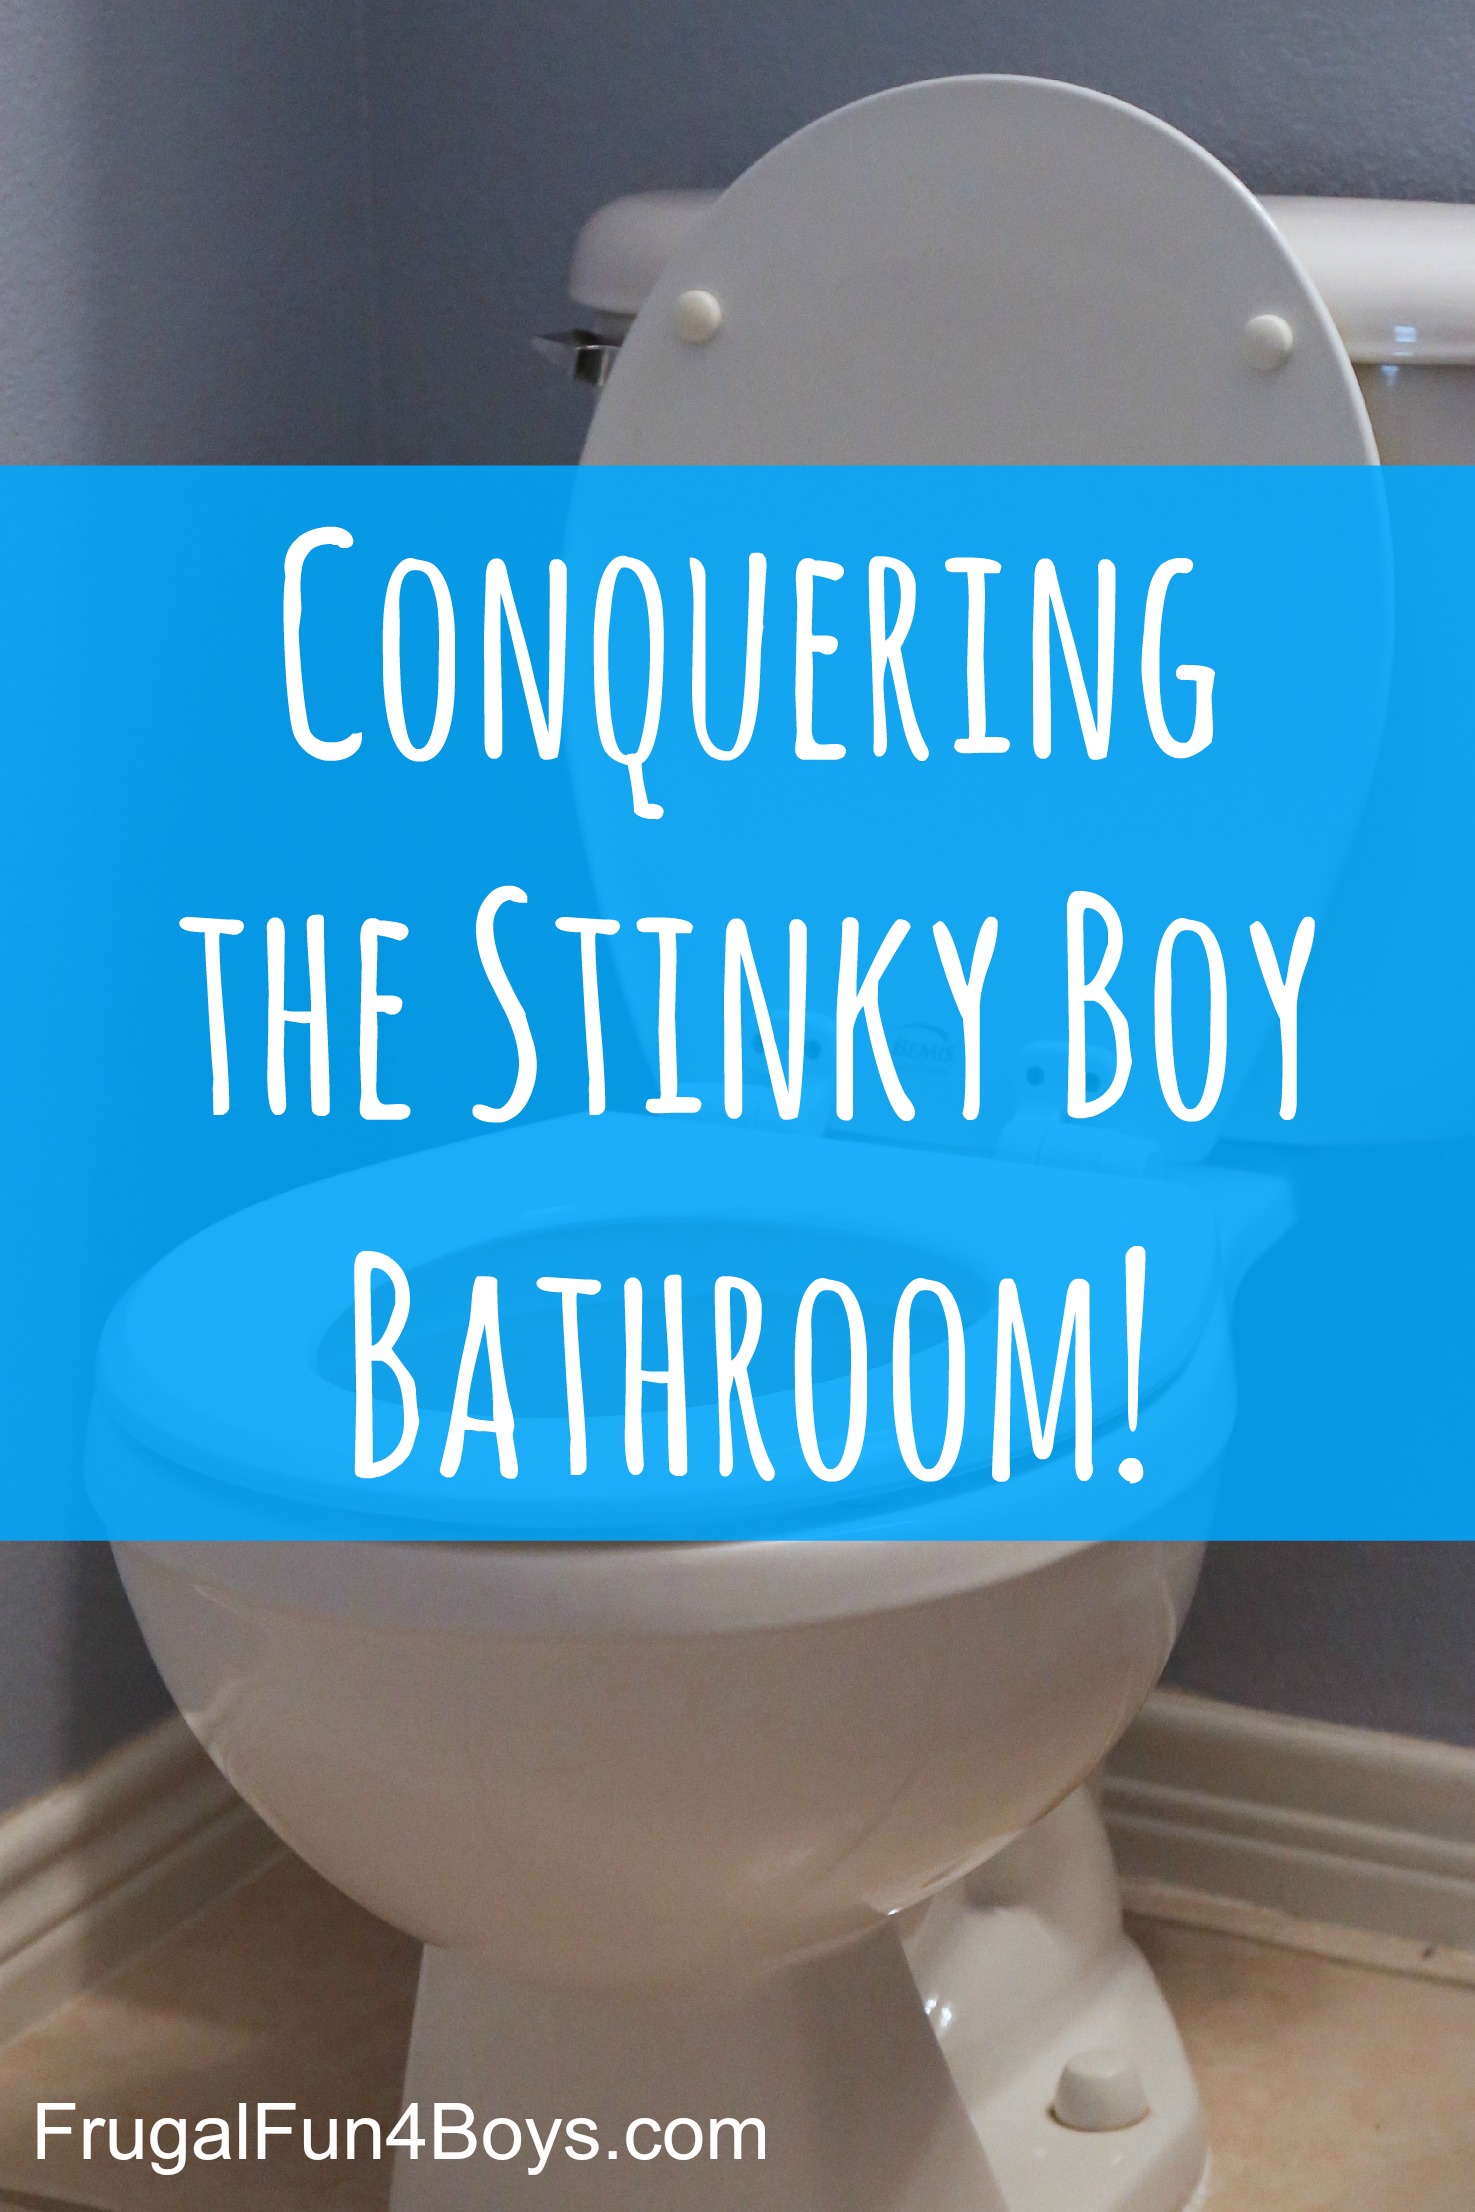 Getting Rid Of Boy Bathroom Stink, How To Get Urine Smell Out Of Bathroom Tile Floor